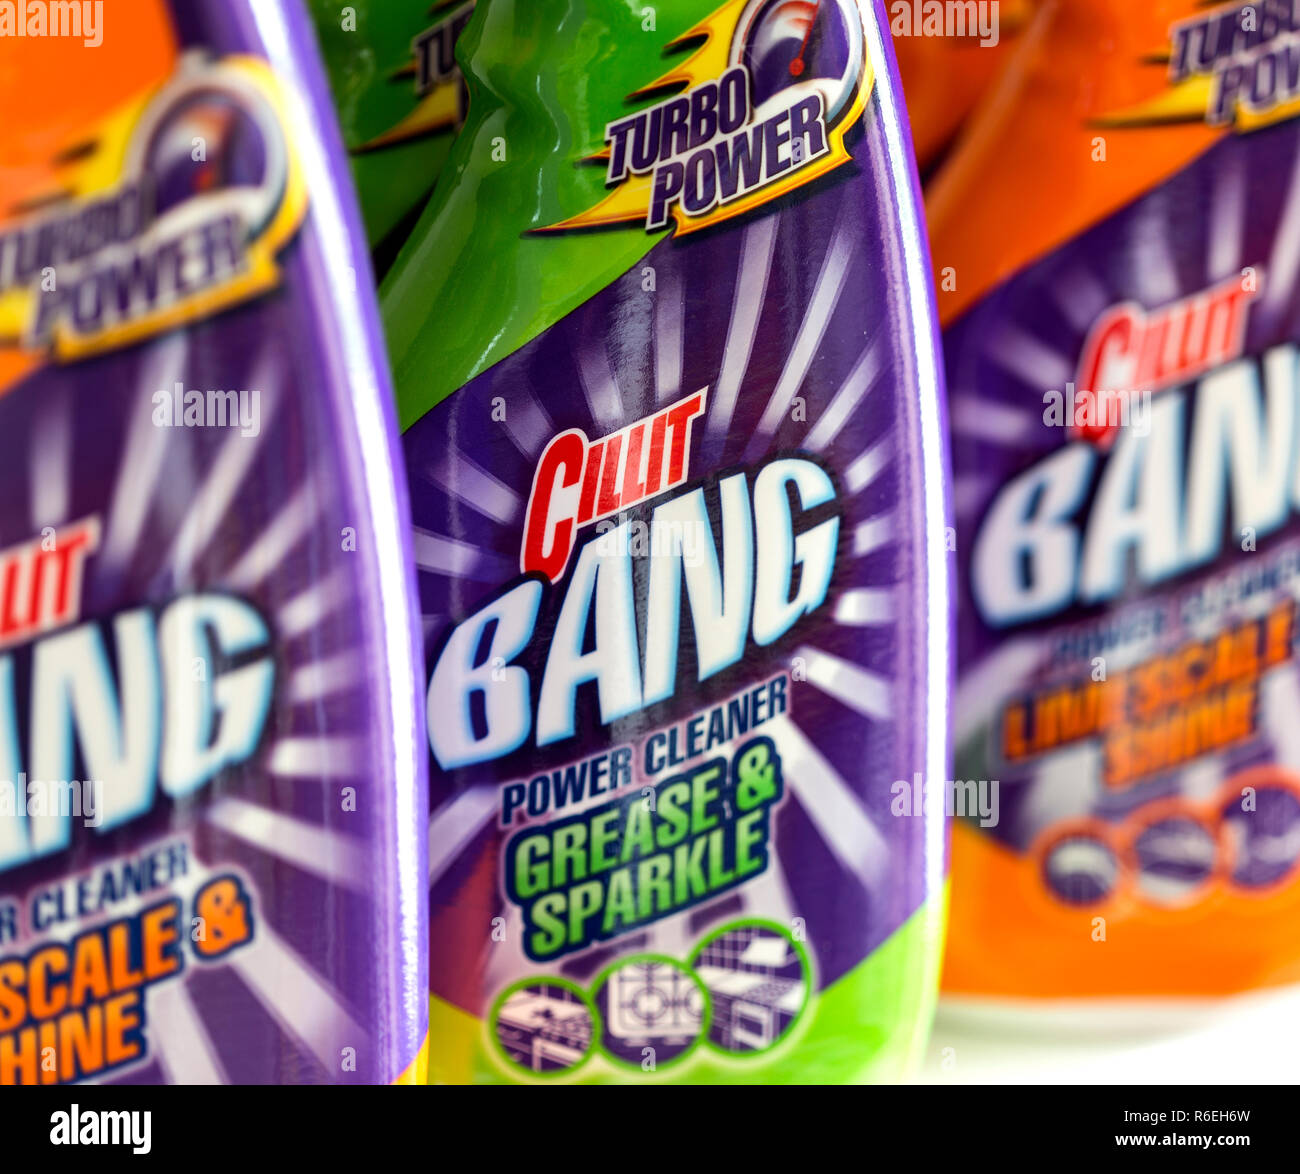 BELGRADE - APRIL 26, 2014 Cillit Bang is the brand of cleaning products  sold by the manufacturer Reckitt Benckiser Stock Photo - Alamy